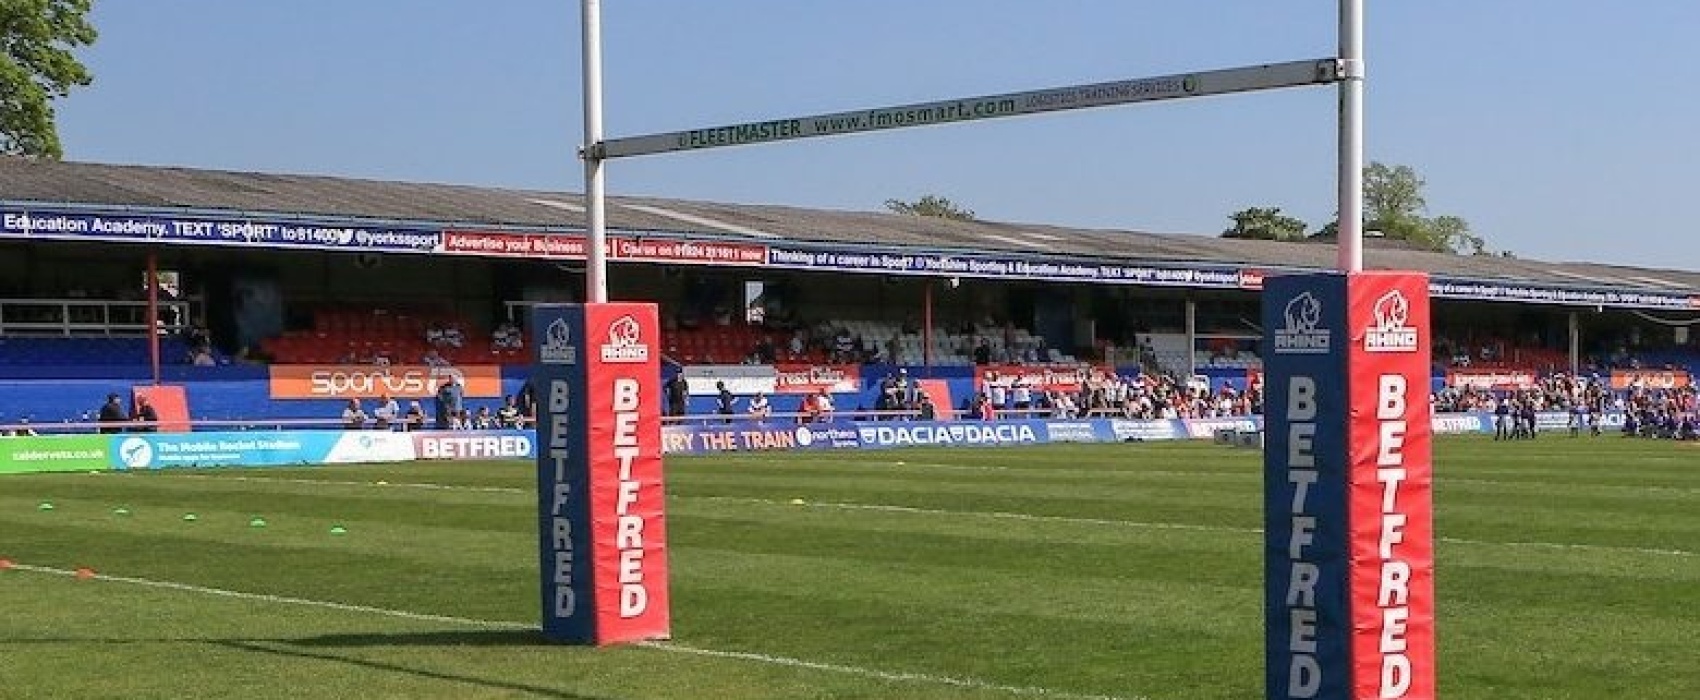 Eagles vs Halifax to take place at Wakefield